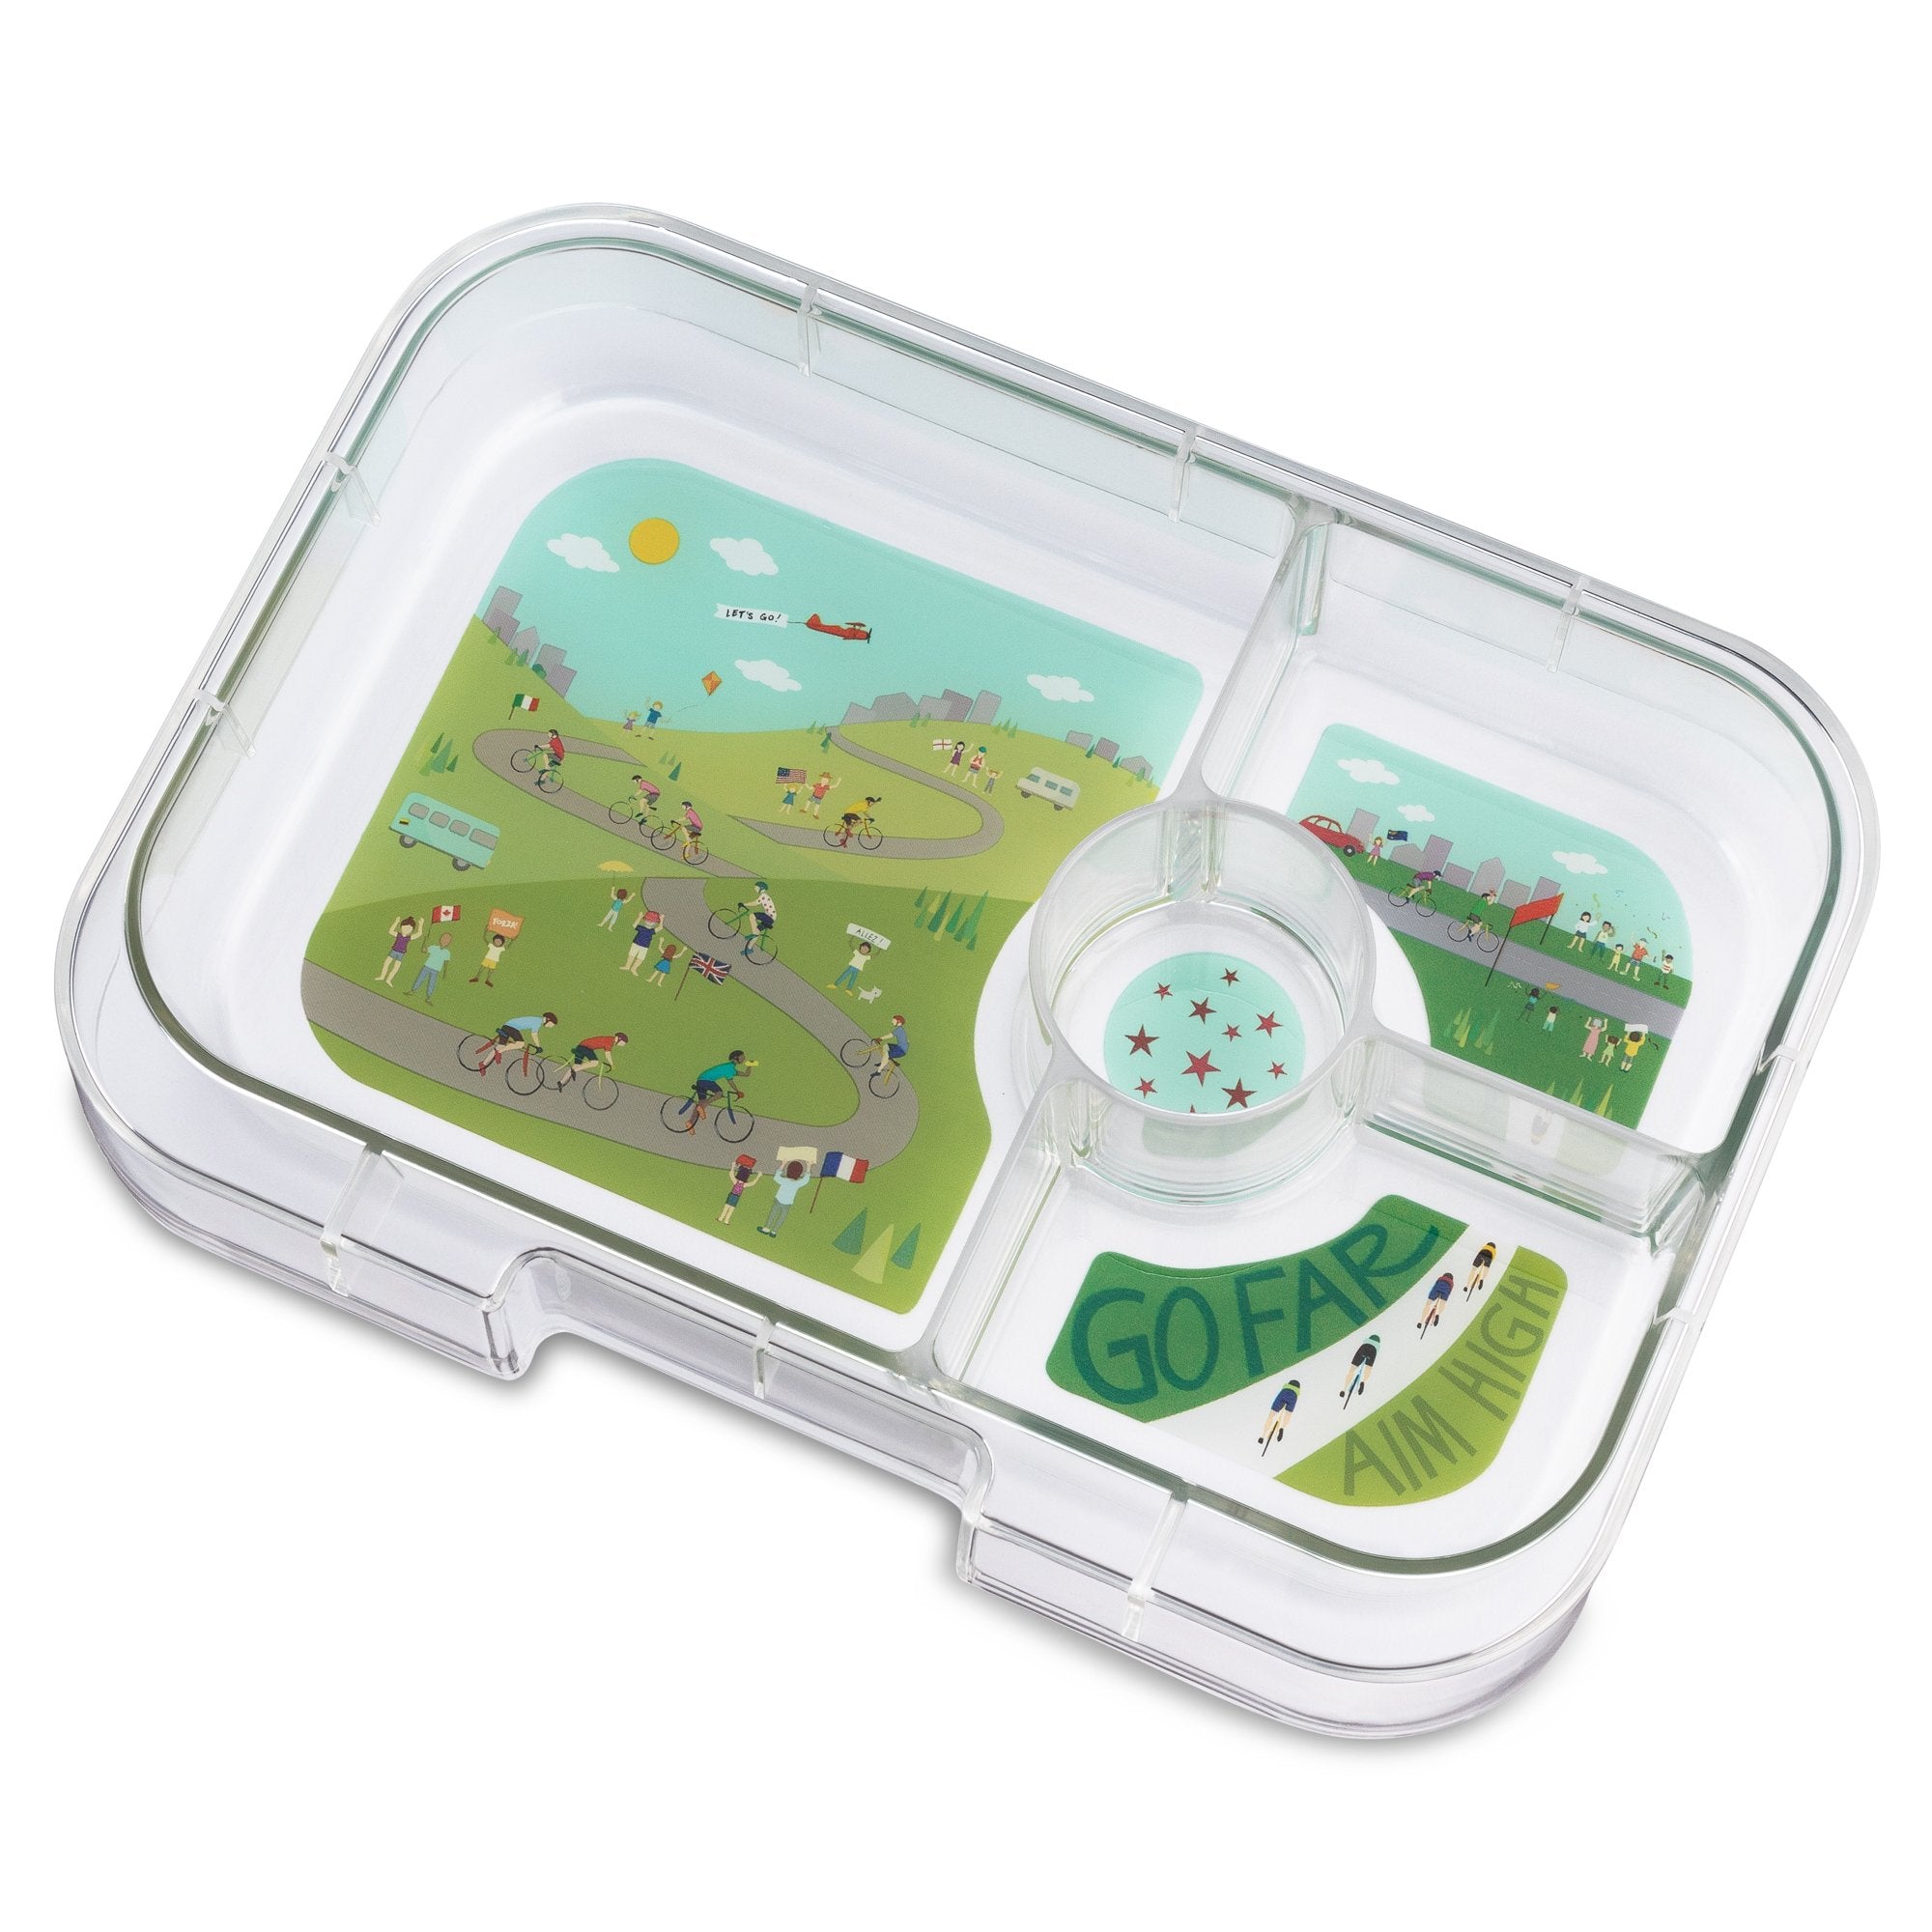 Yumbox Leakproof Bento Box Panino: 4-Compartment Kids & Adults Bento;  Perfect for Sandwich Packed Lunch; Compact 8.5x6x1.8; Healthy Portions  (Tropical